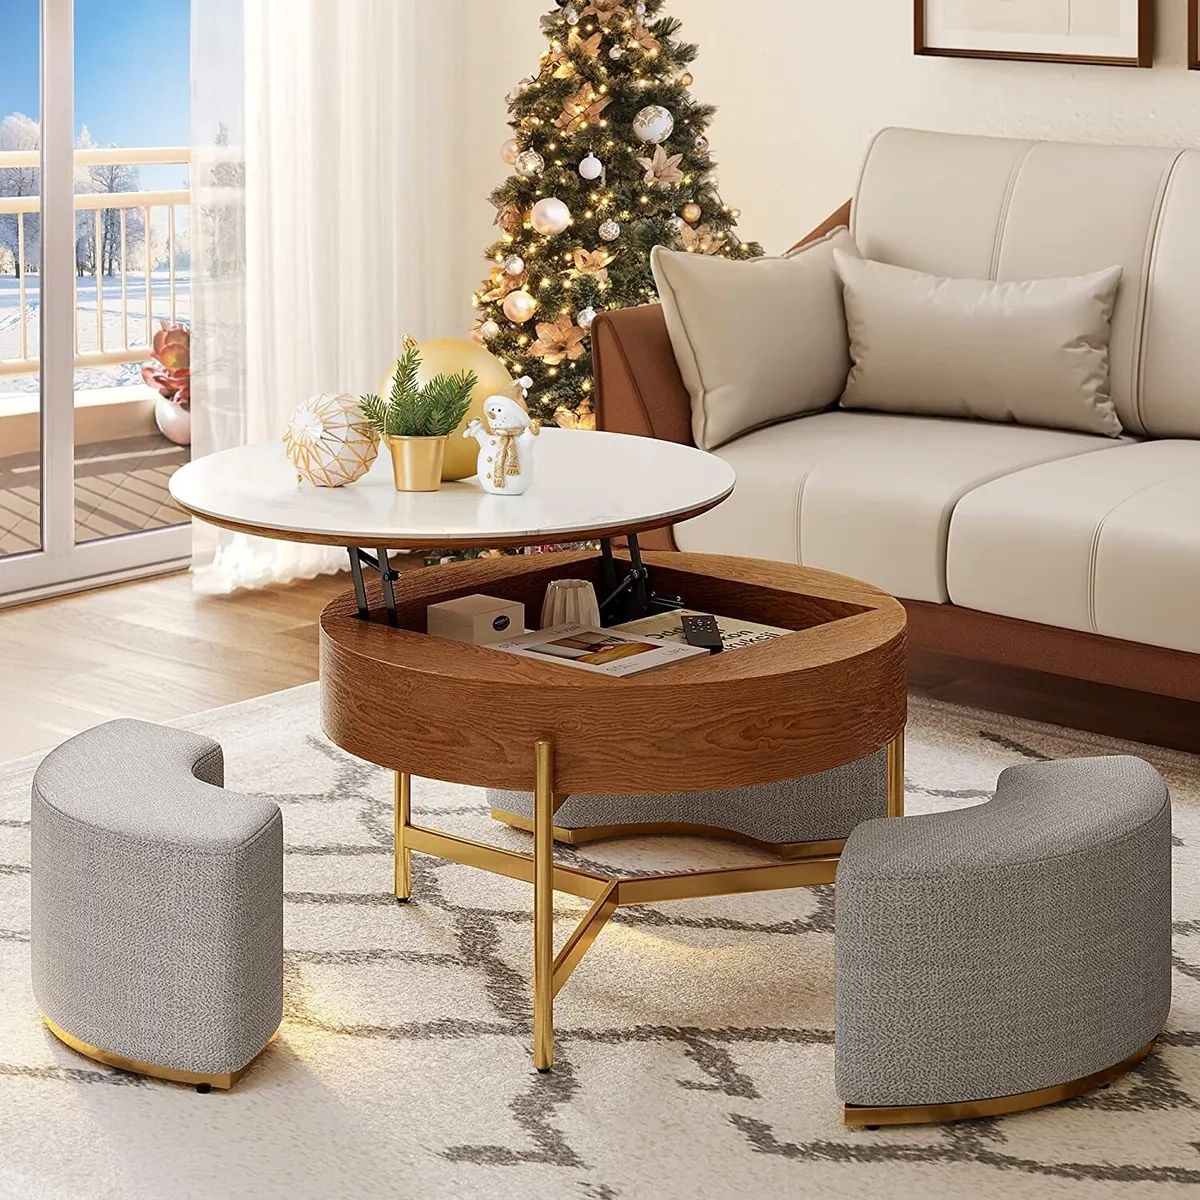 Lift Top Round Coffee Table With Hidden Storage Compartment 3 Stools Living  Room | Ebay In Modern Coffee Tables With Hidden Storage Compartments (Photo 6 of 15)